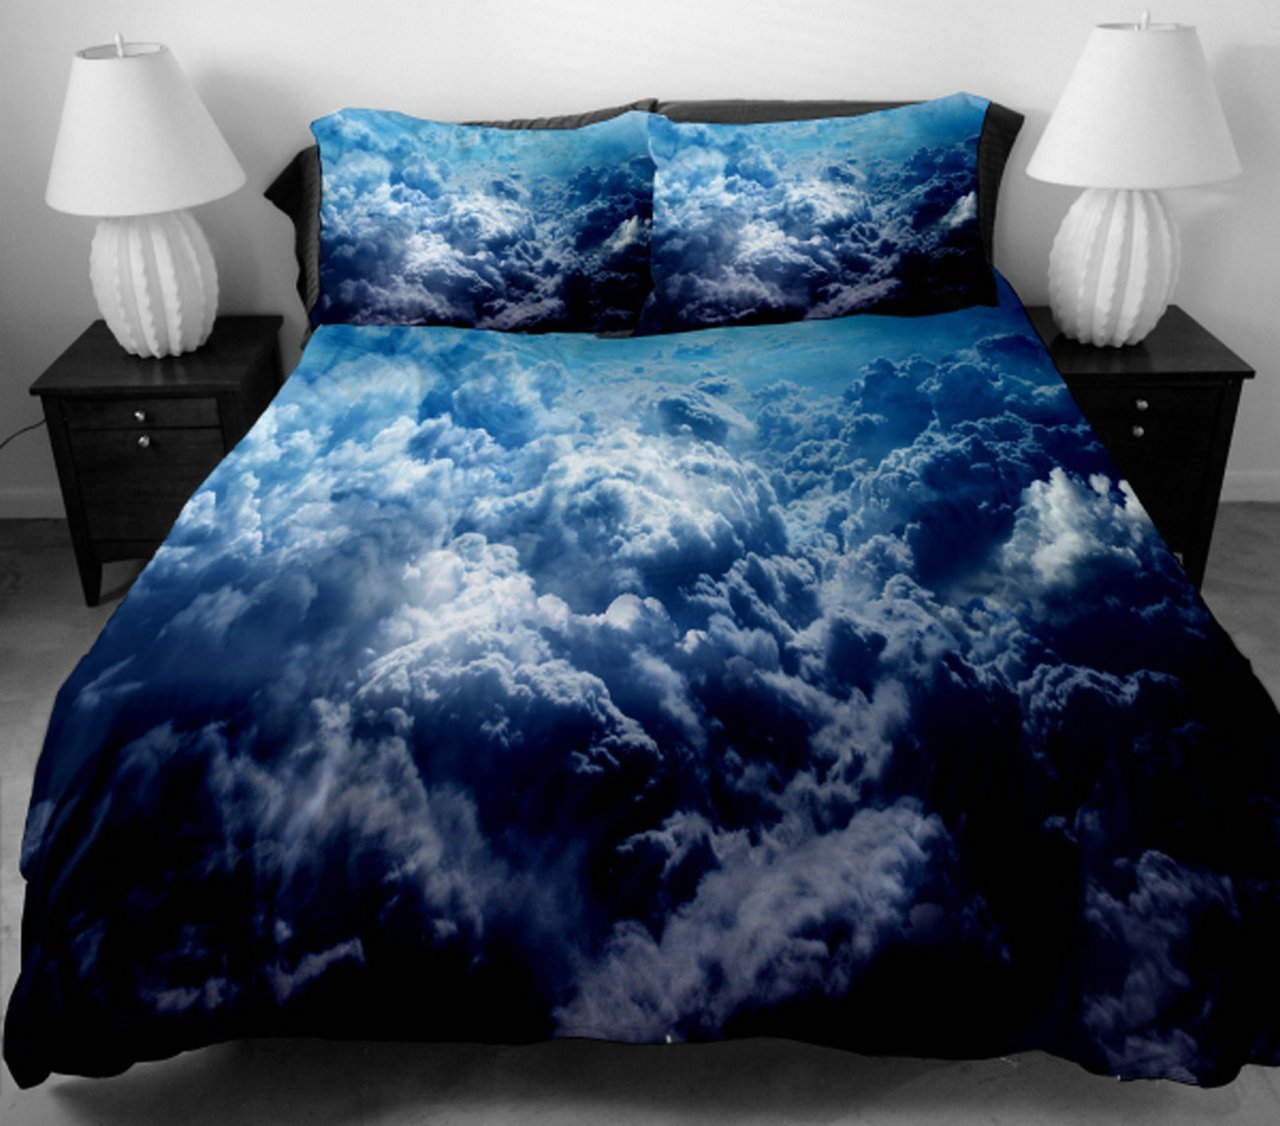 imagine-create-repeat:Check out these gorgeous galaxy bed sets by Anlye! http://anlye.com/